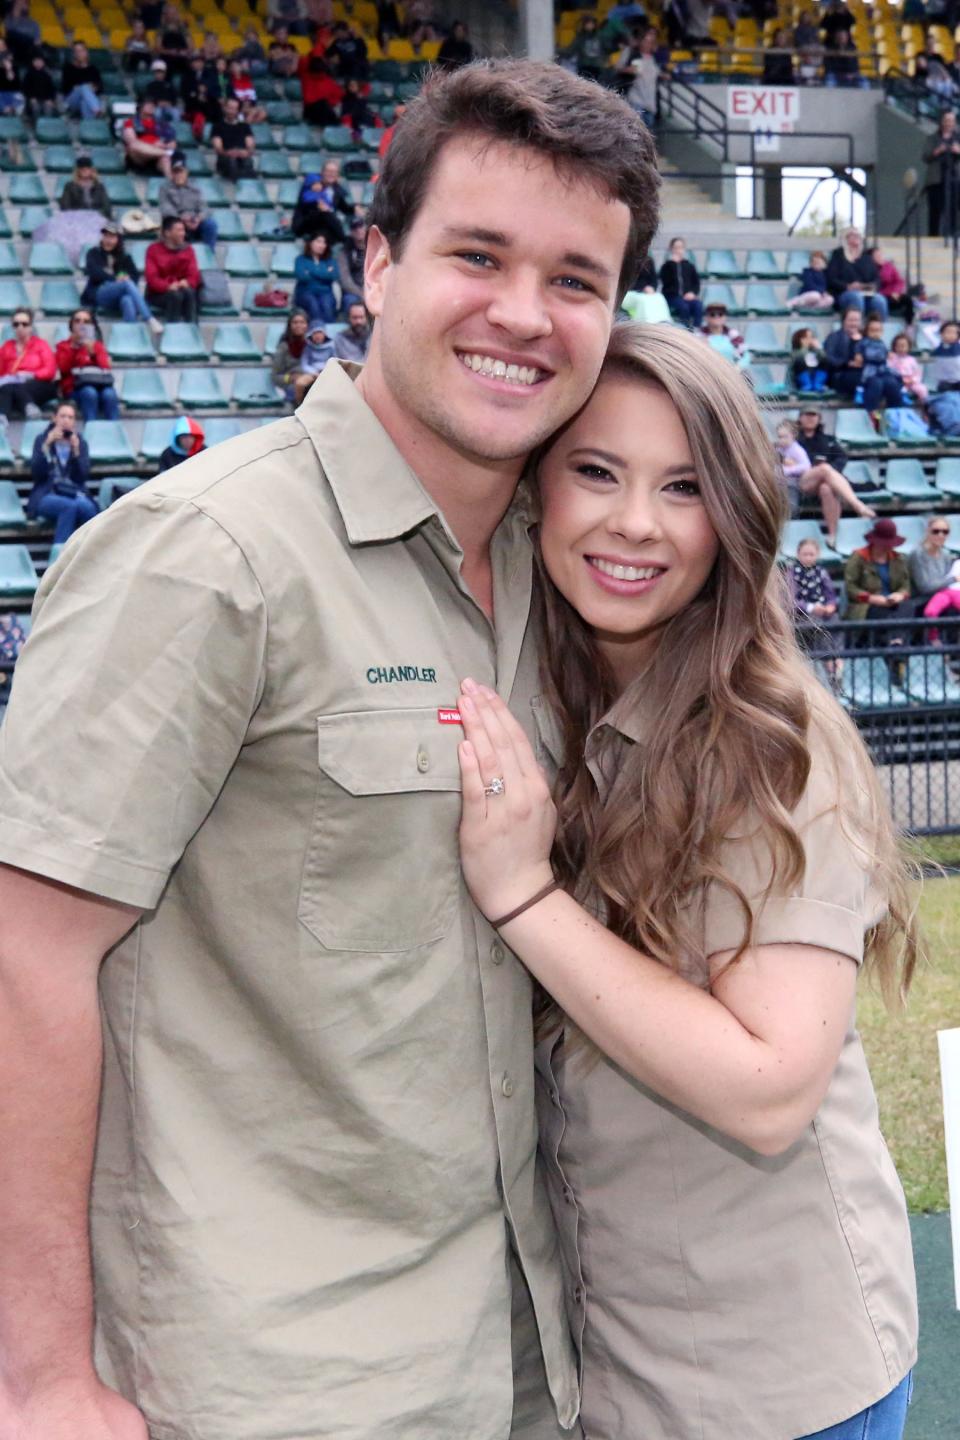 Bindi Irwin Celebrated Mother’s Day With a ThrowbackToo